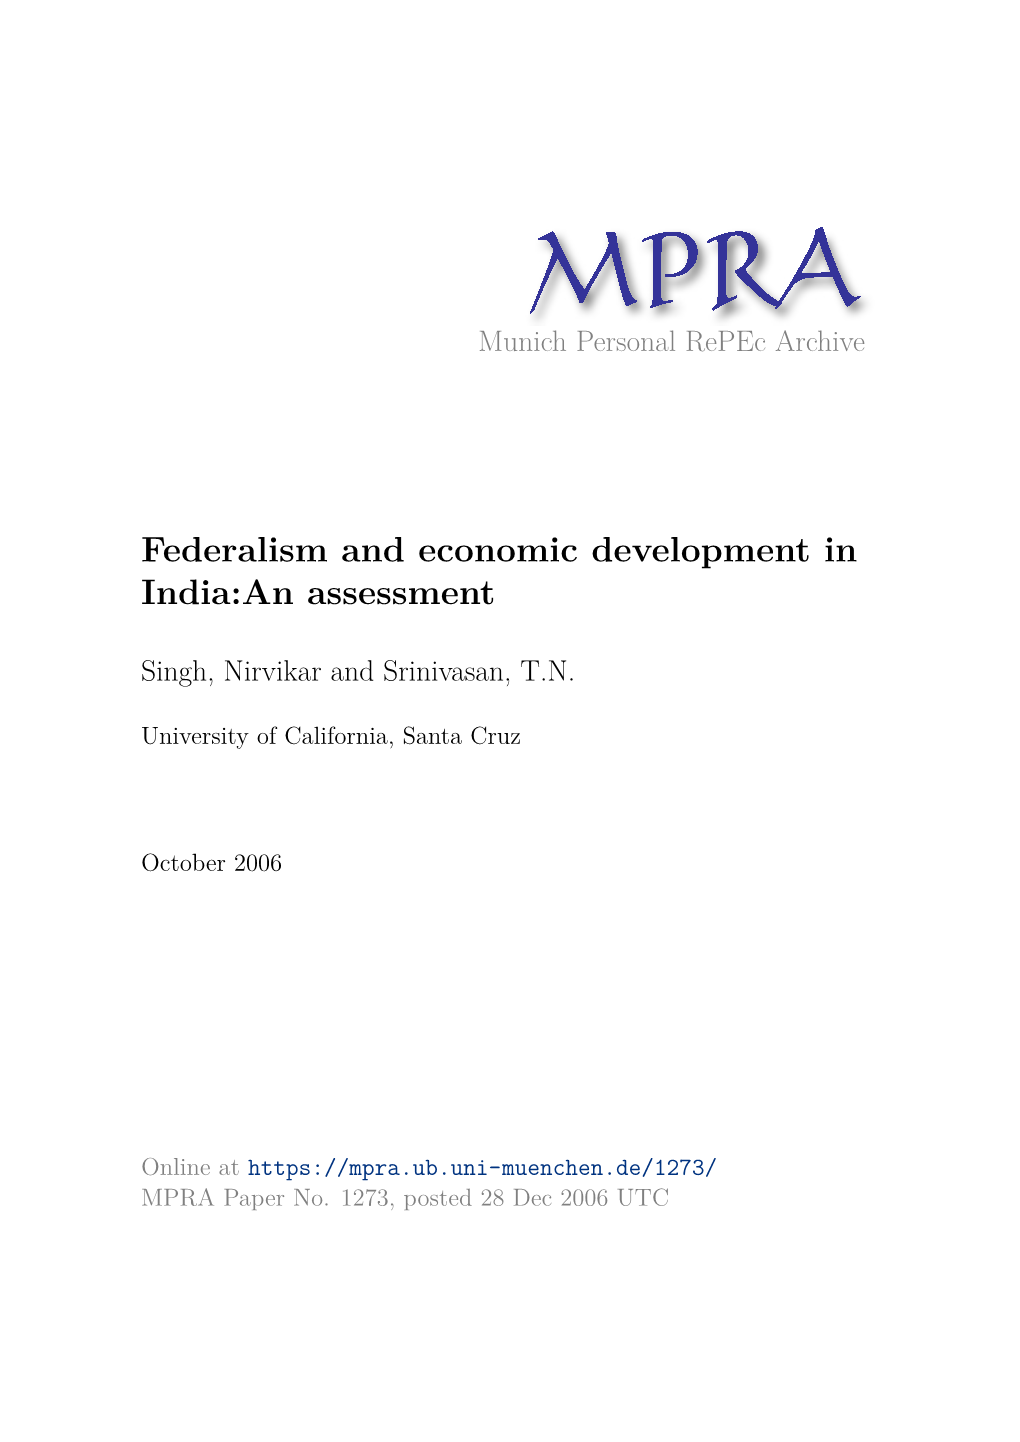 Federalism and Economic Development in India:An Assessment